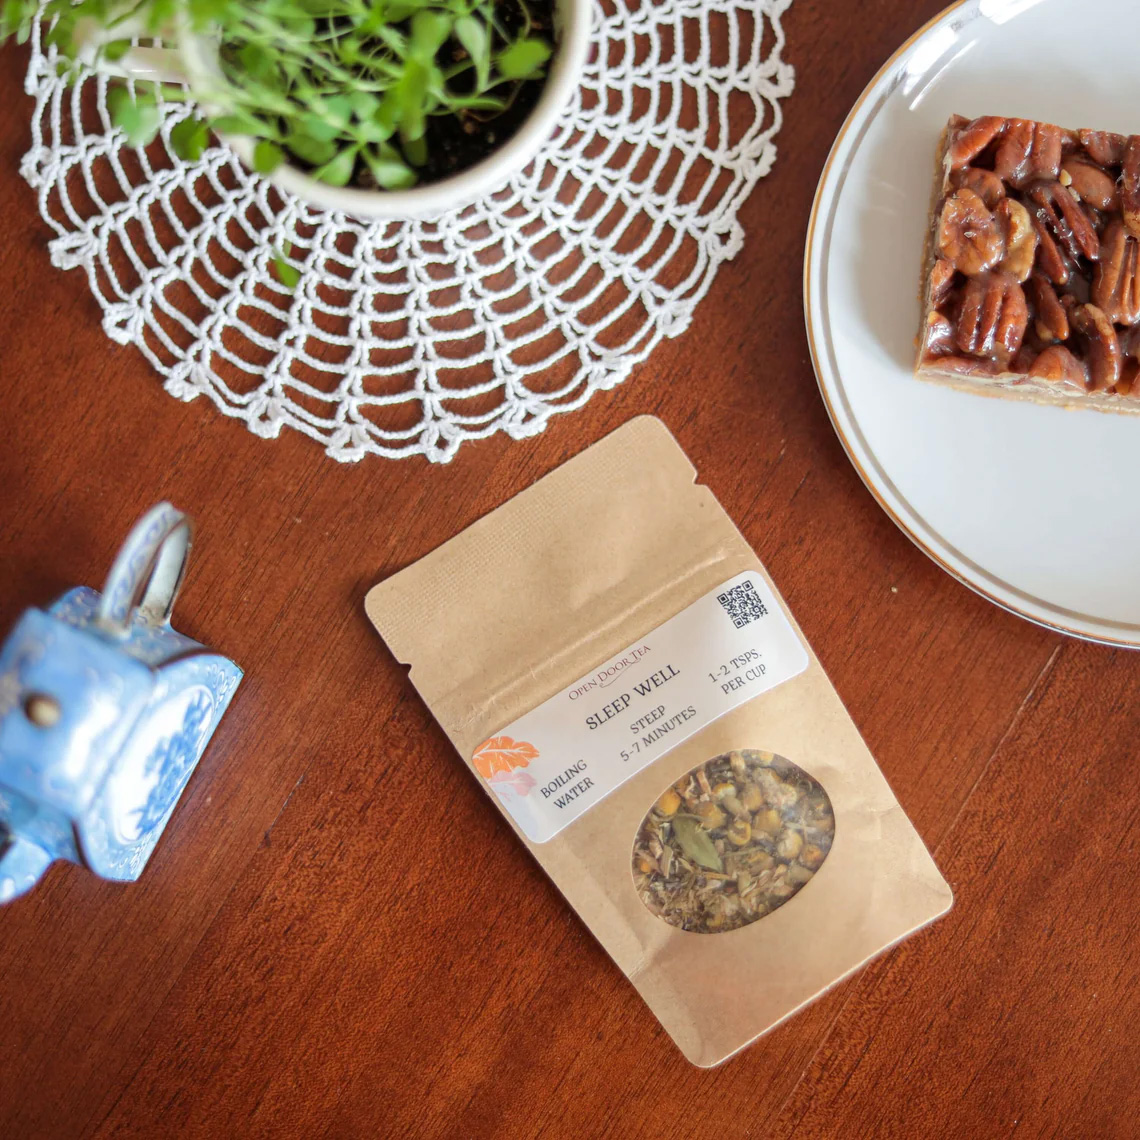 Open Door Tea packaging on table with plate of food and plant in background